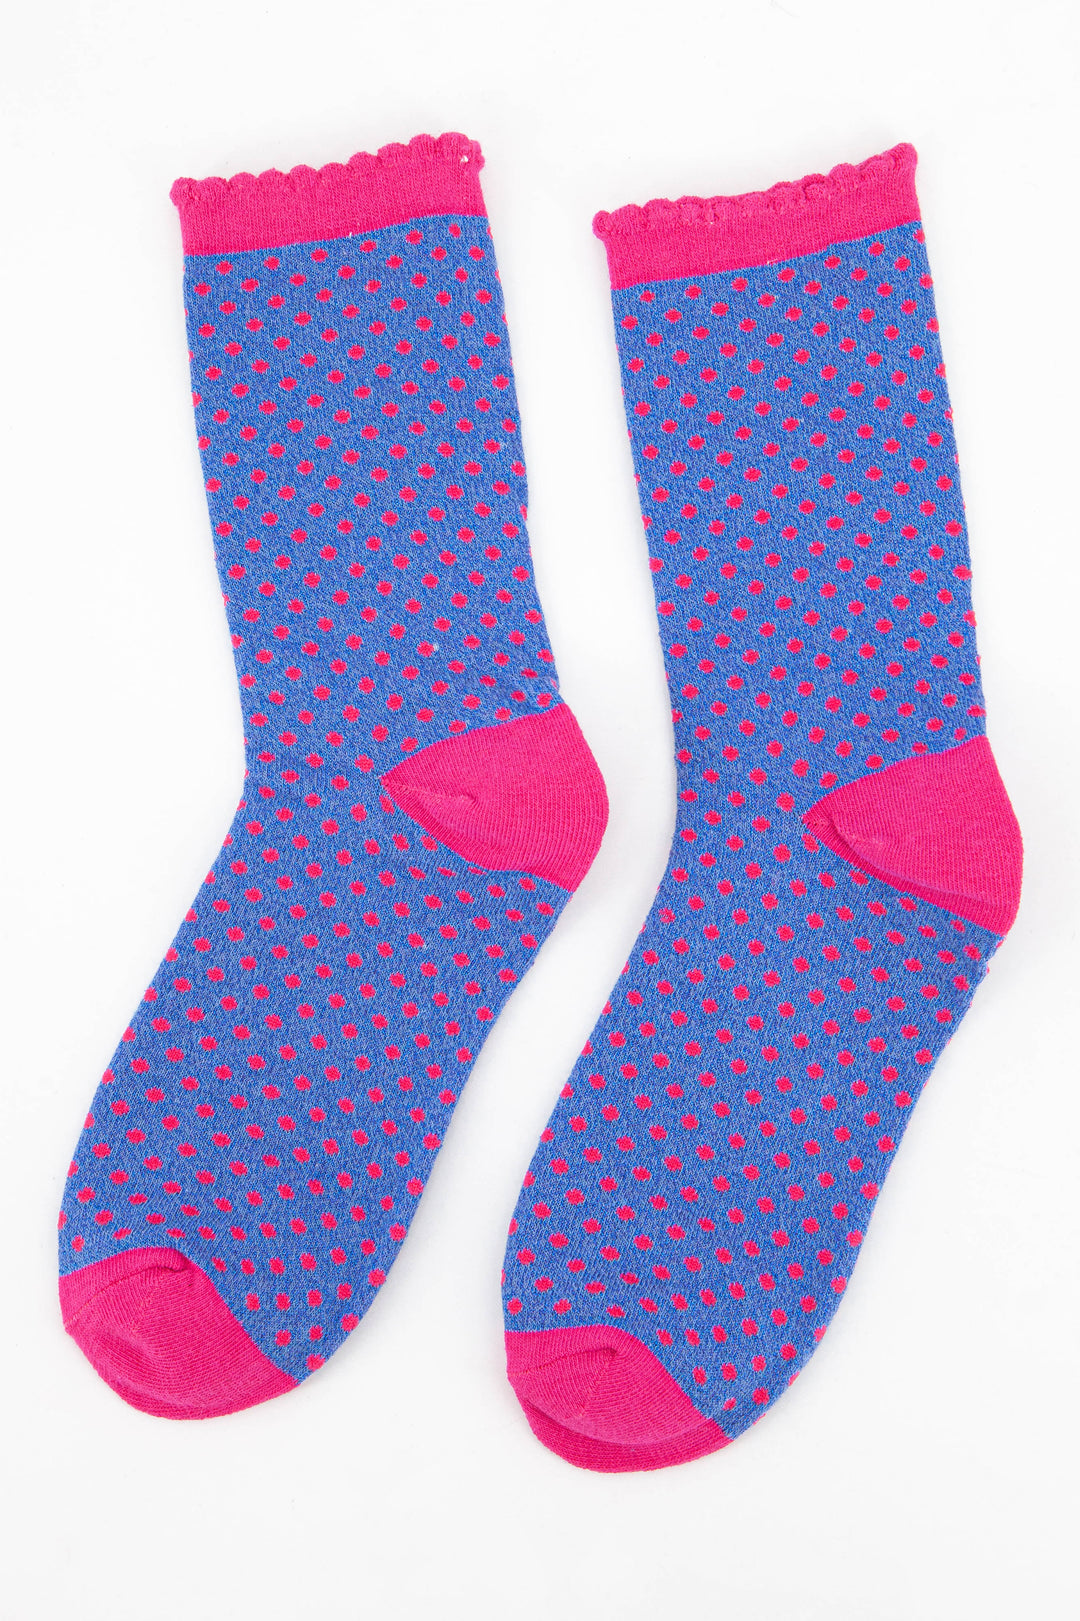 blue and pink sparkly glitter ankle socks with a pink scalloped cuff